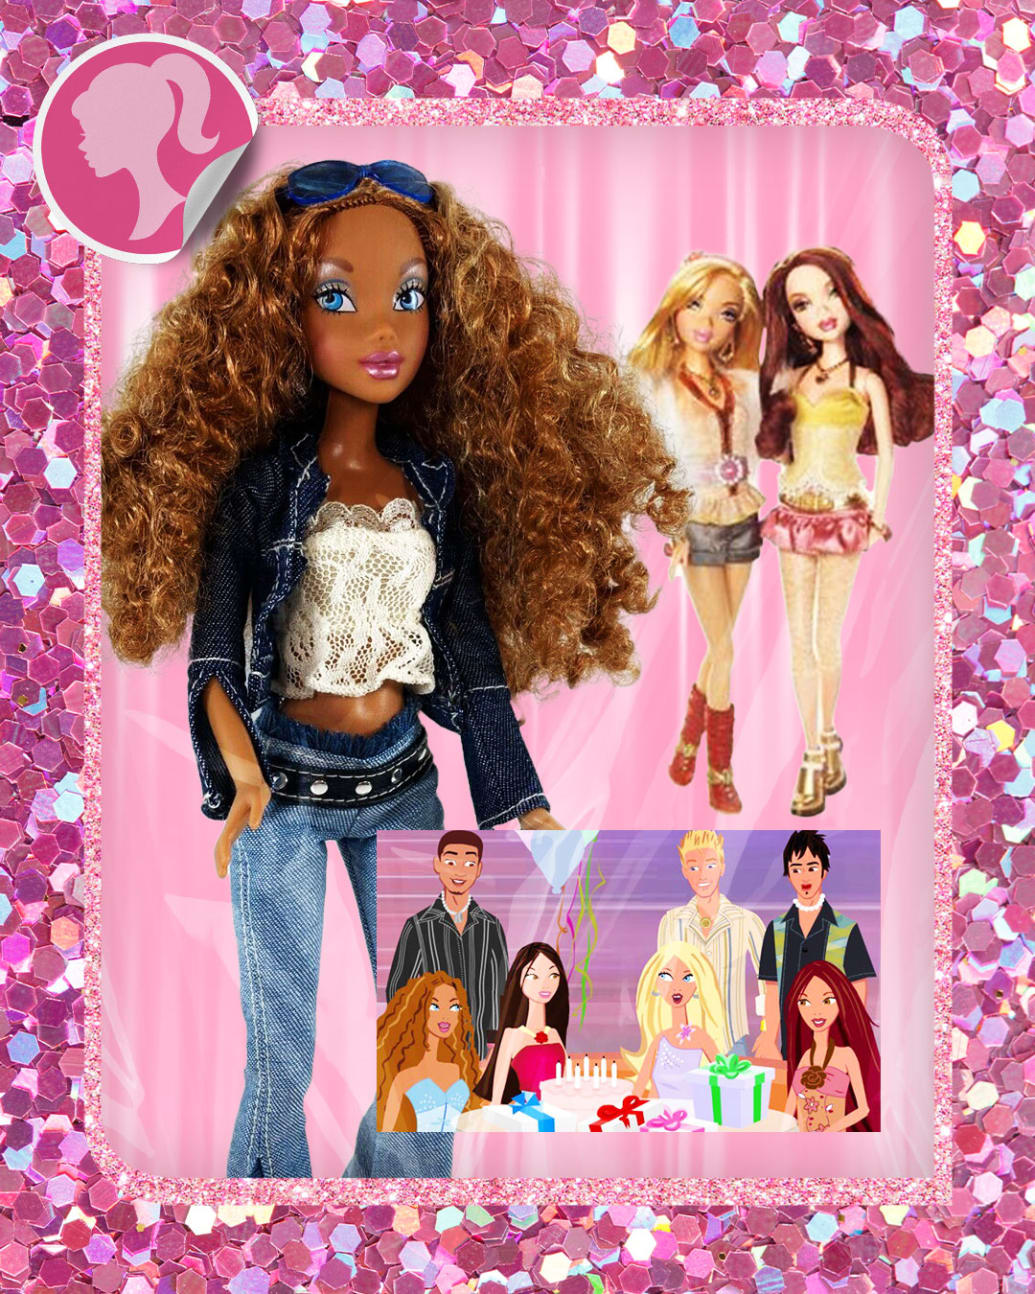 The Myscene Barbies That Tried To Make